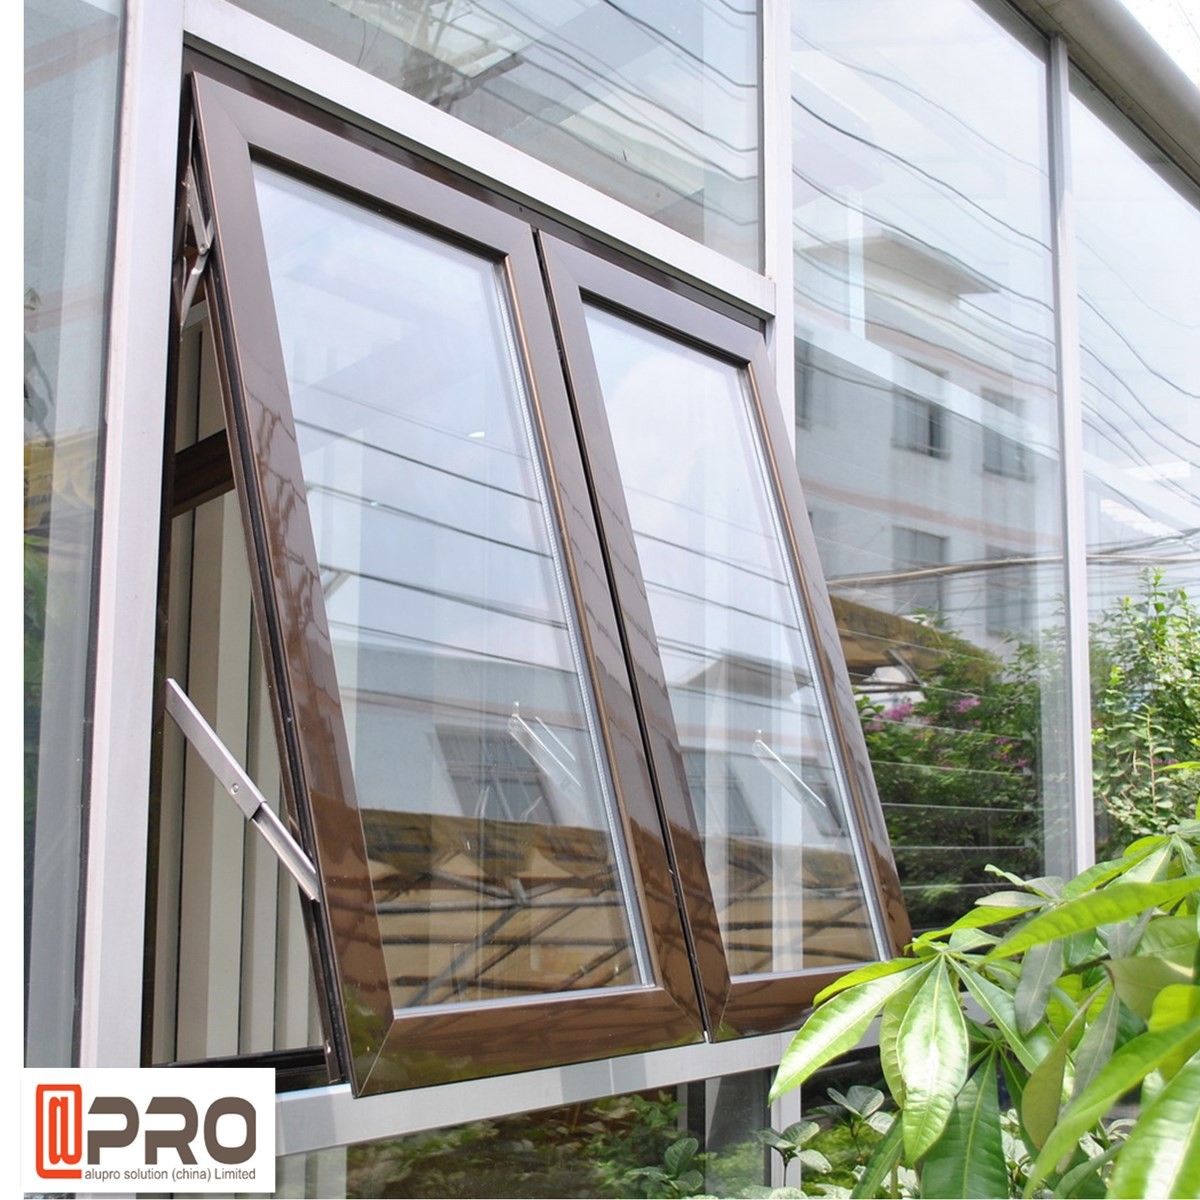 glass awning window,awning window with grill,aluminum awning window parts,awning window price philippines